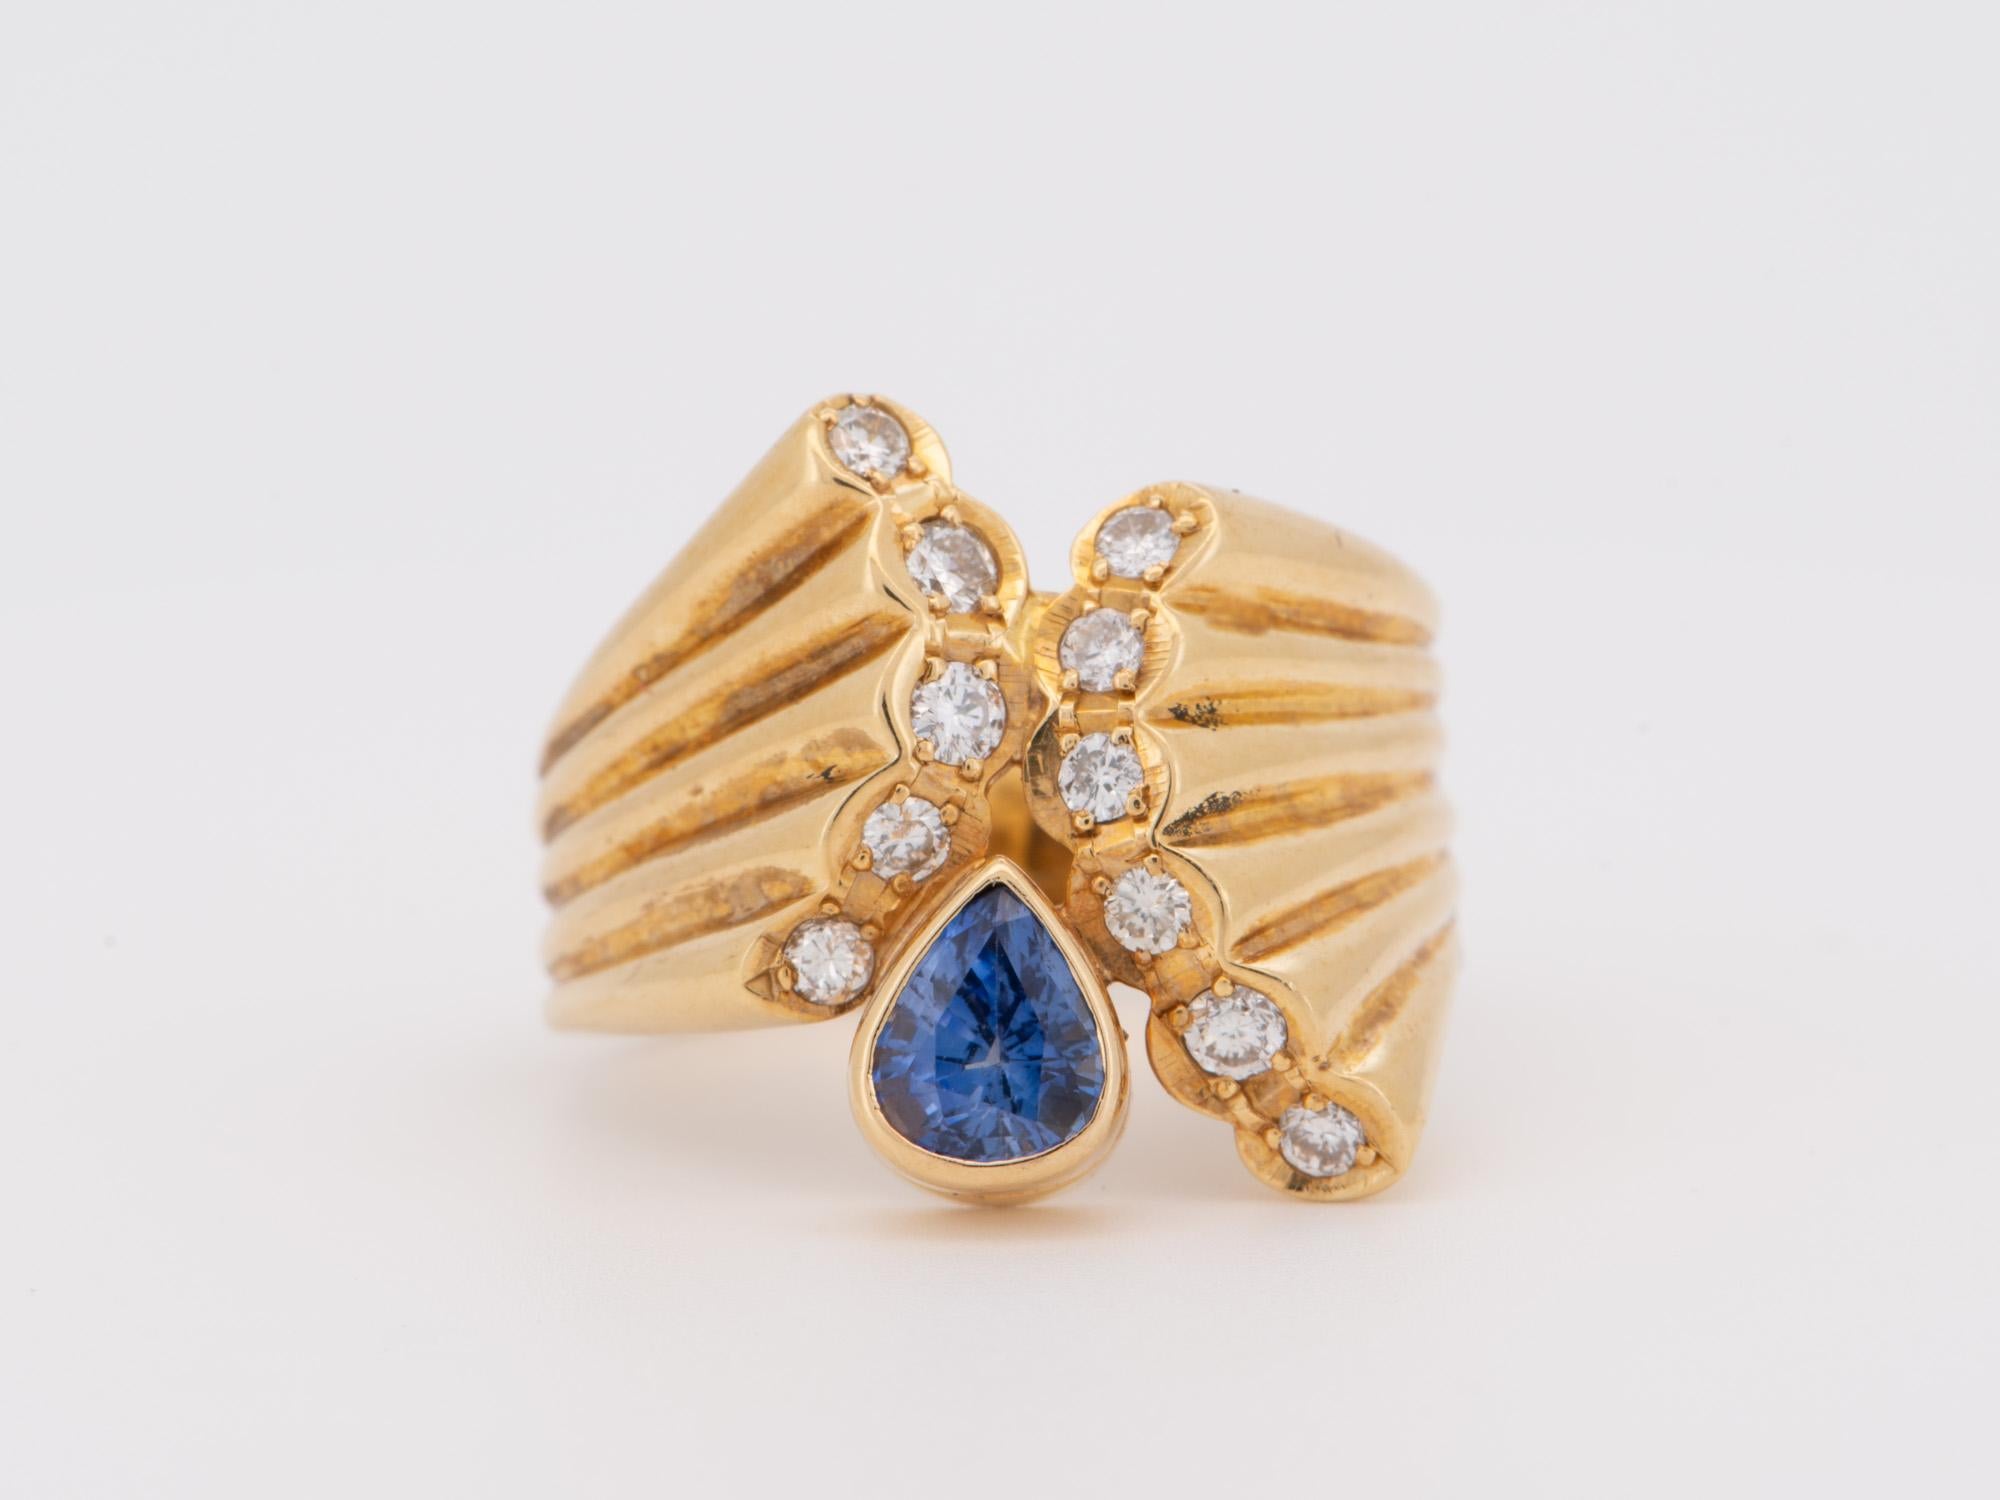 ♥ Sapphire and Diamond Ribbed Ring 18K Gold
♥ The face of the ring measures 14mm in width (East West direction), 16mm in length (North South direction), and sits 3.8mm tall from the finger. The band is 4.9mm wide.

♥ US size 5.75 (Free resizing up